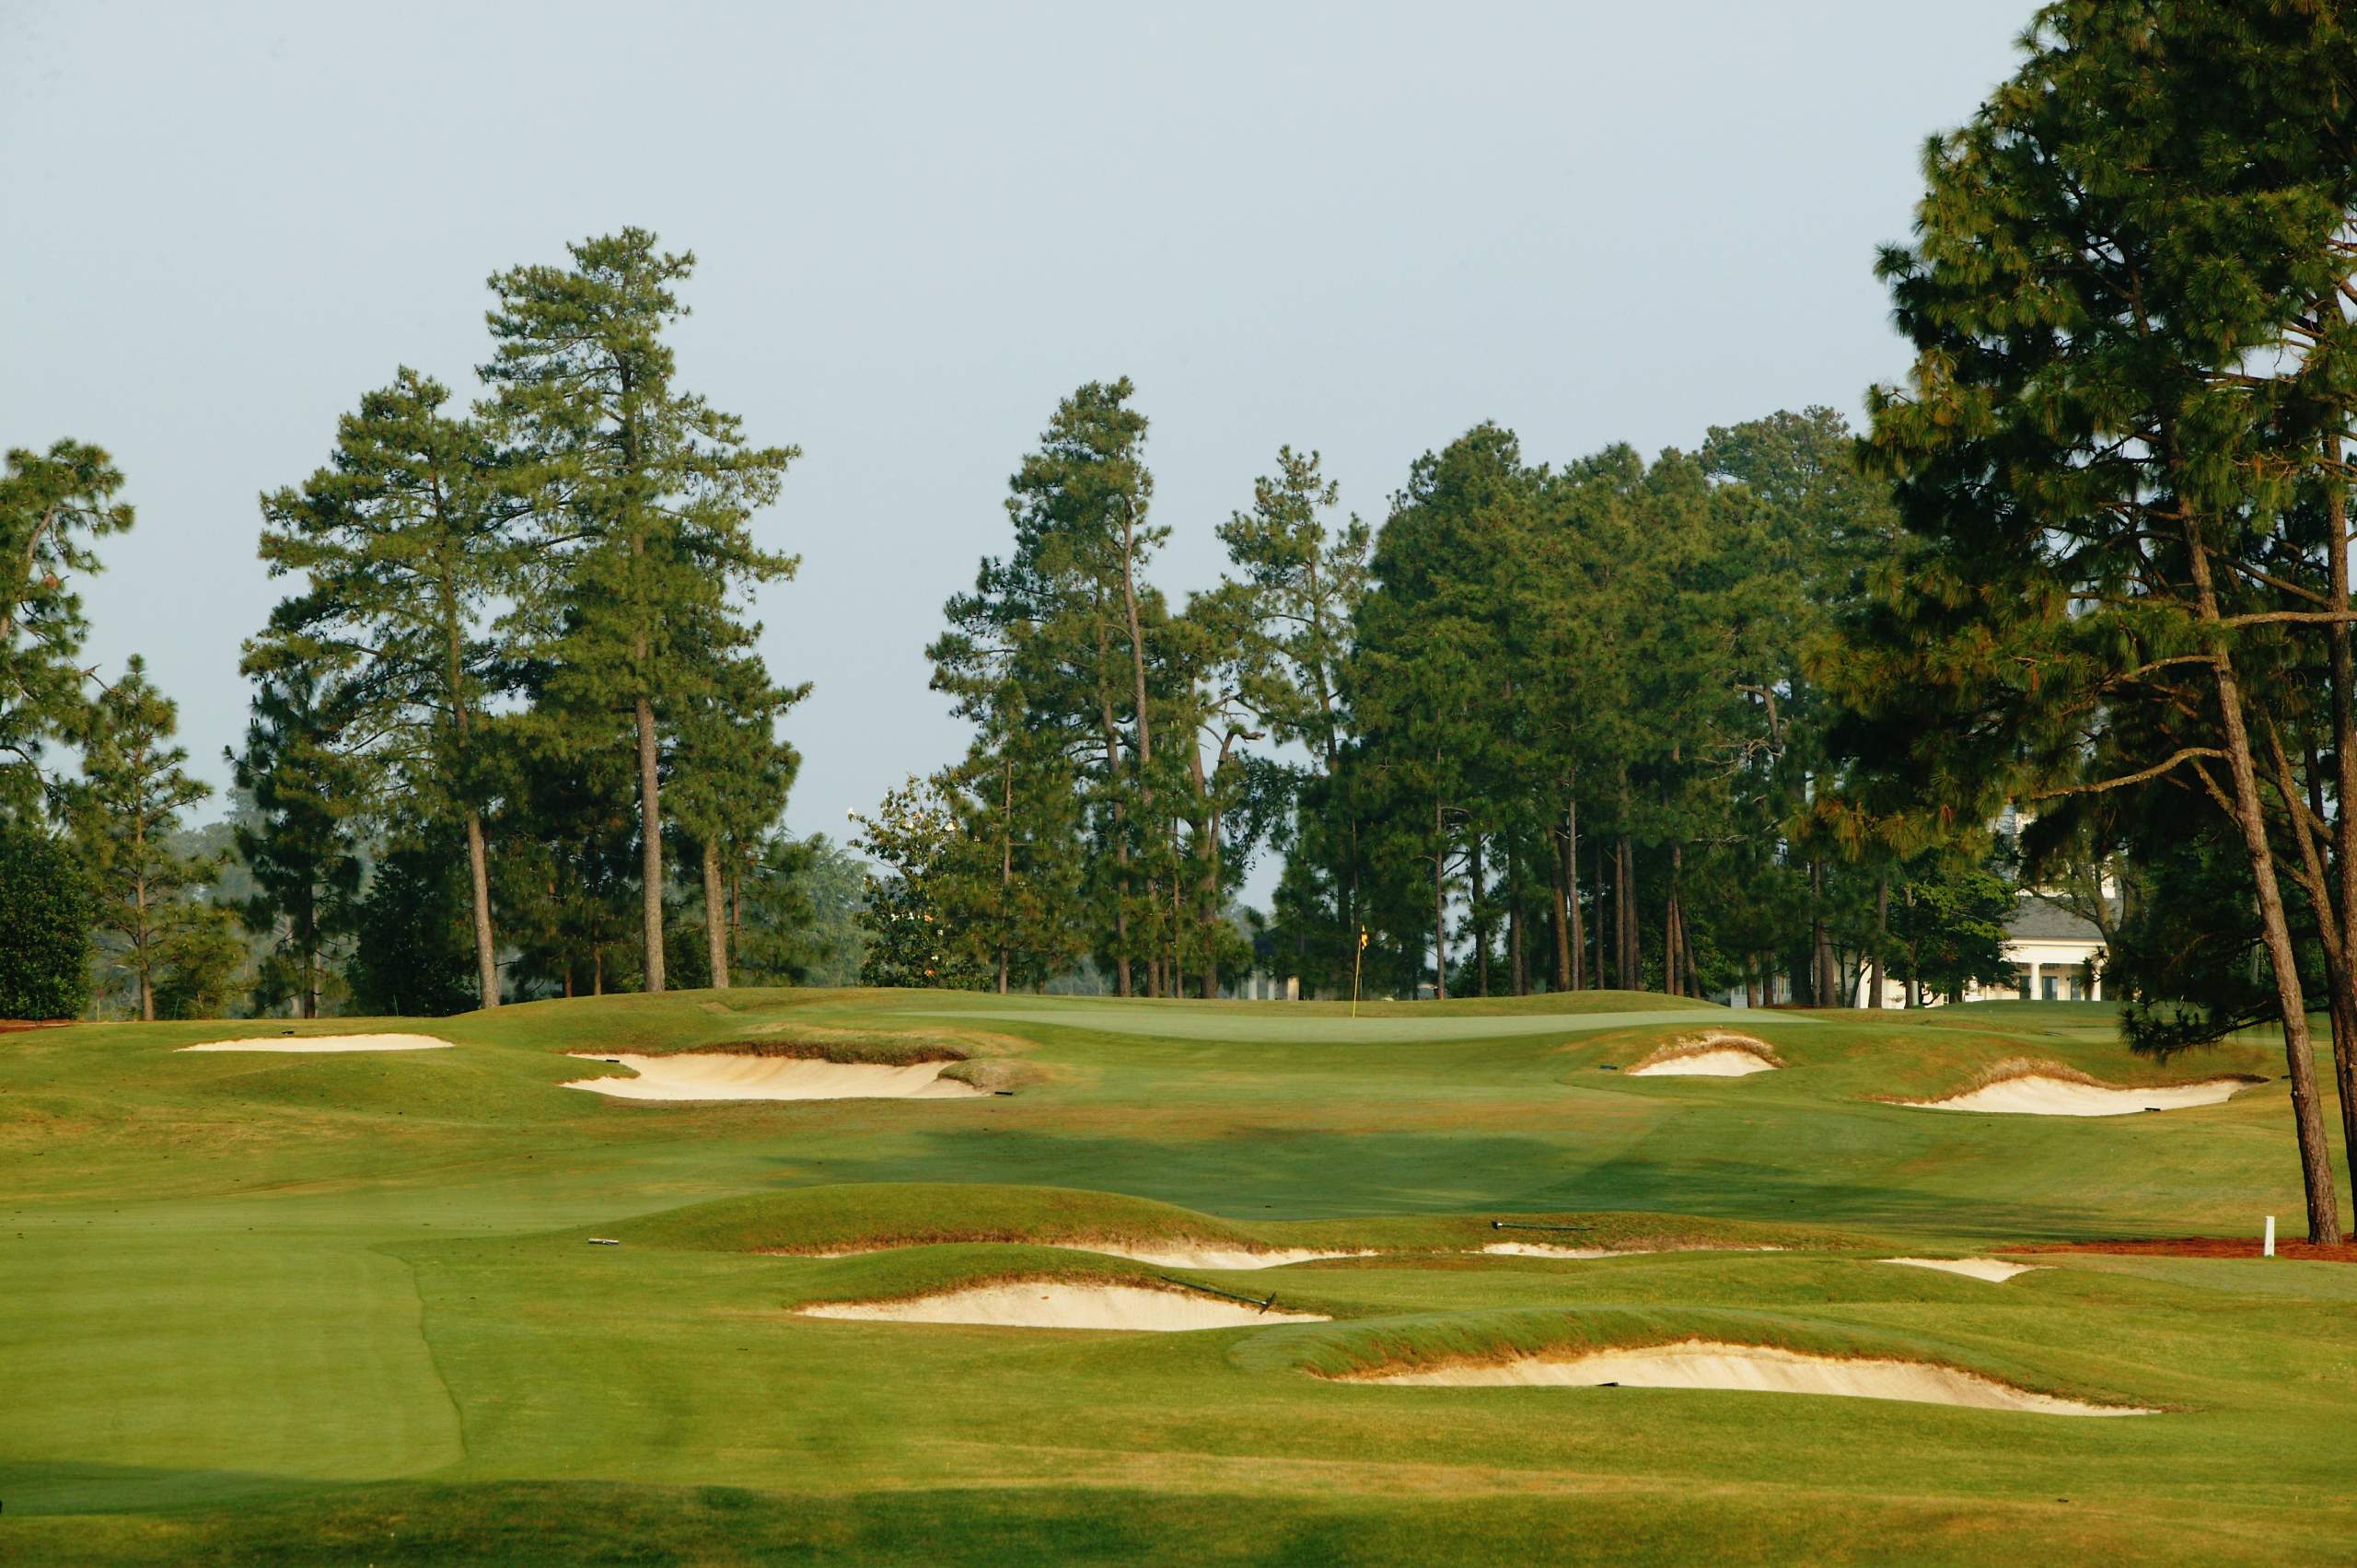 <em><b>Course Location: Pinehurst, North Carolina </b></em> The Pinehurst Resort in North Carolina is home to NINE 18-hole courses. Talk about a grand property. In 1907, Donald Ross' design was completed. This included introducing Pinehurst's second course to the state. No. 2 is known for having incredibly tough greens. At one time, the course was also lined with a thick Bermuda rough. However, Bill Coore and Ben Crenshaw removed all of the rough during their renovation and returned the course to its original form. The course has hosted four Majors -- most recently the 2014 U.S. Open -- and is currently scheduled to host five more Opens between 2024-2047.